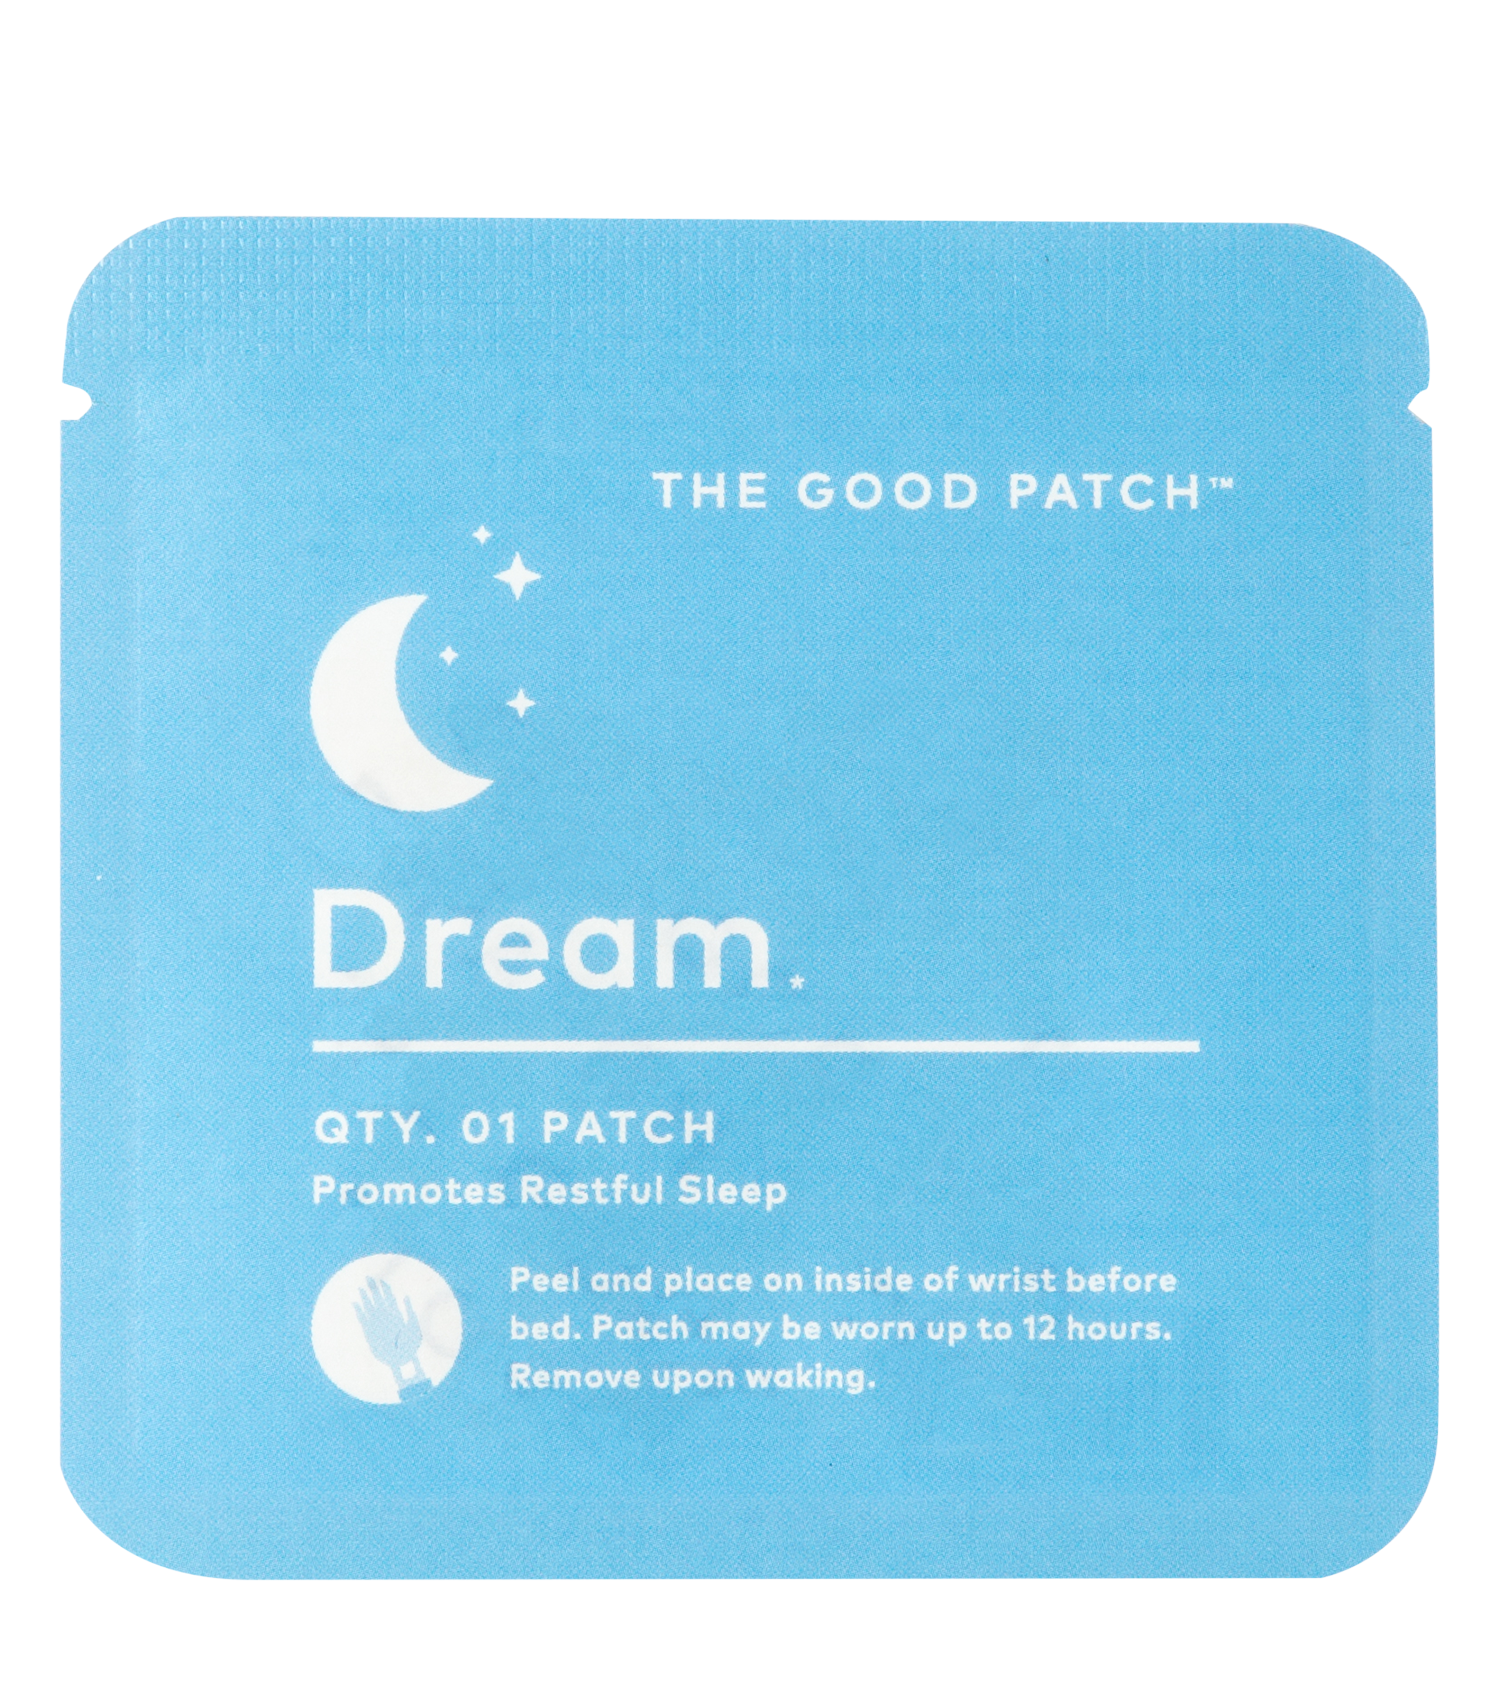 The Good Patch Dream Single The Good Patch Dream Single 1